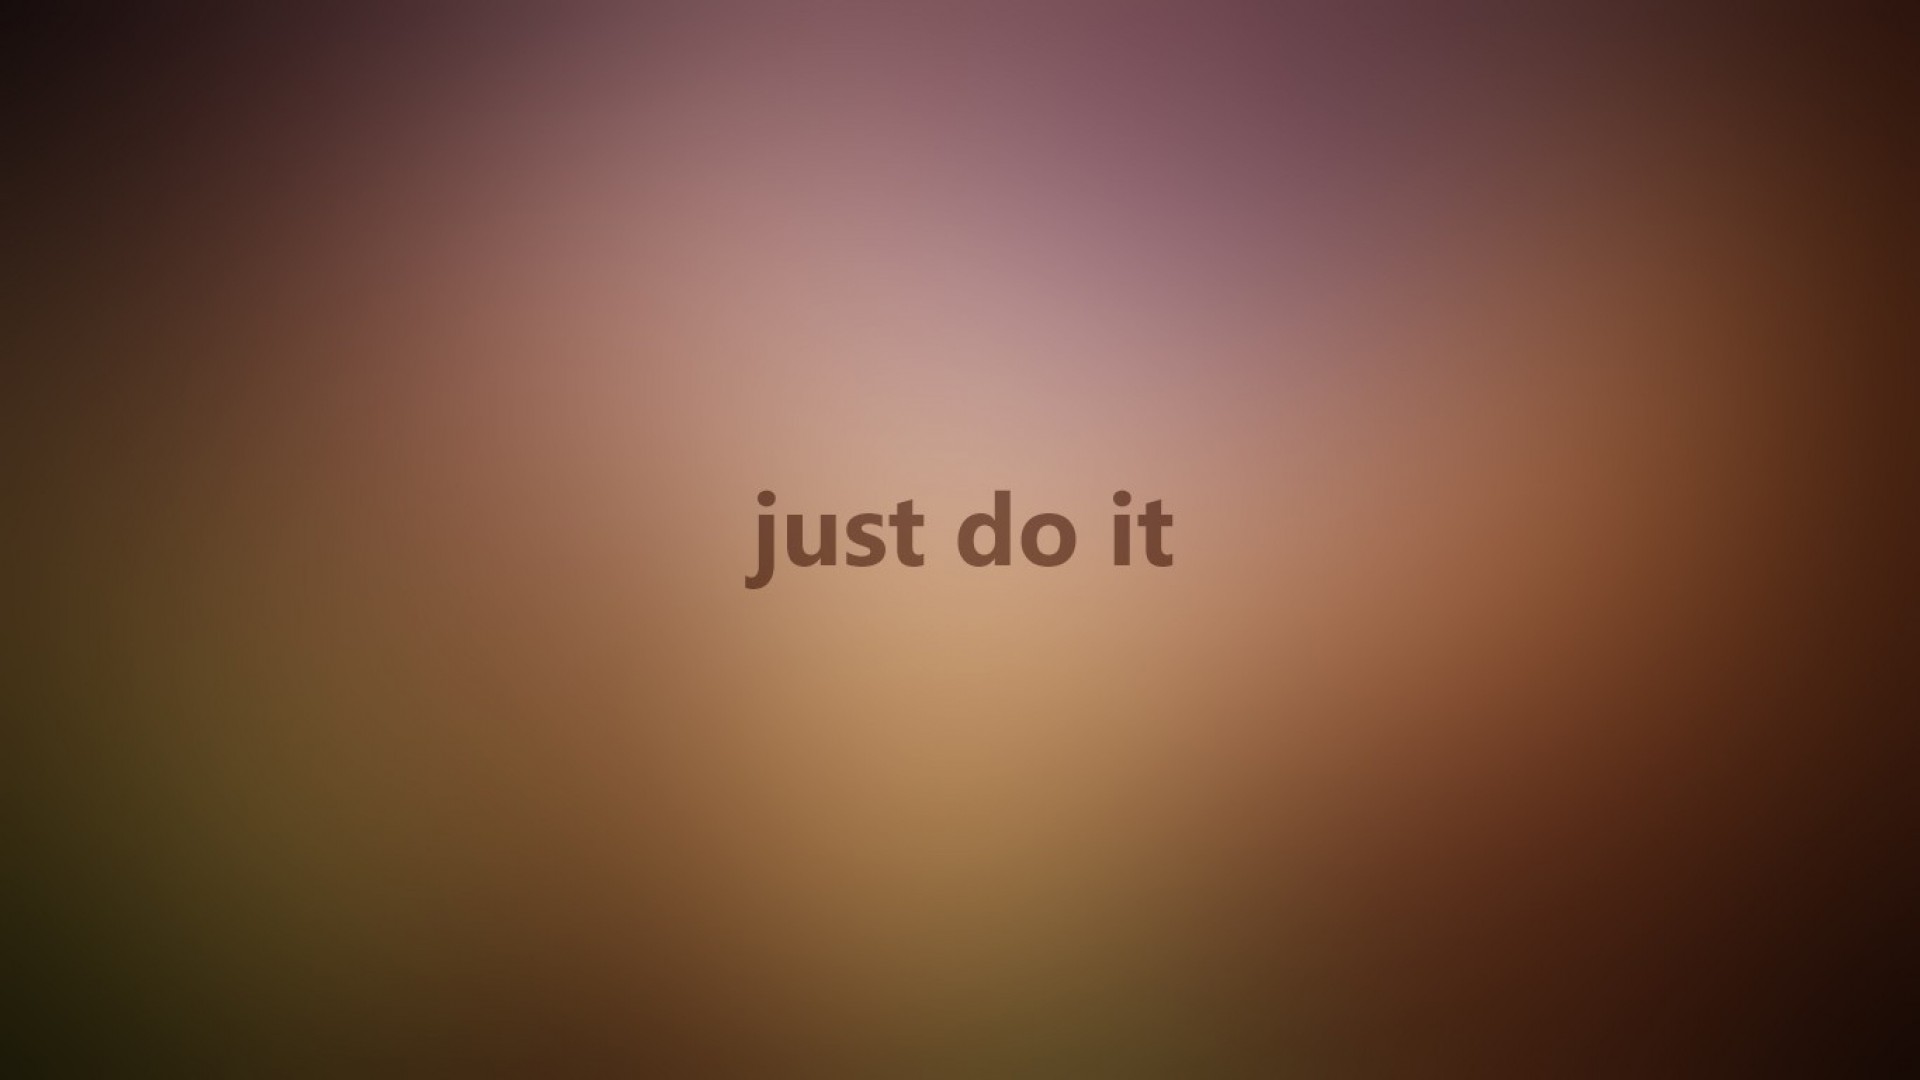 Blurred Motivation just do it Wallpaper   MixHD wallpapers